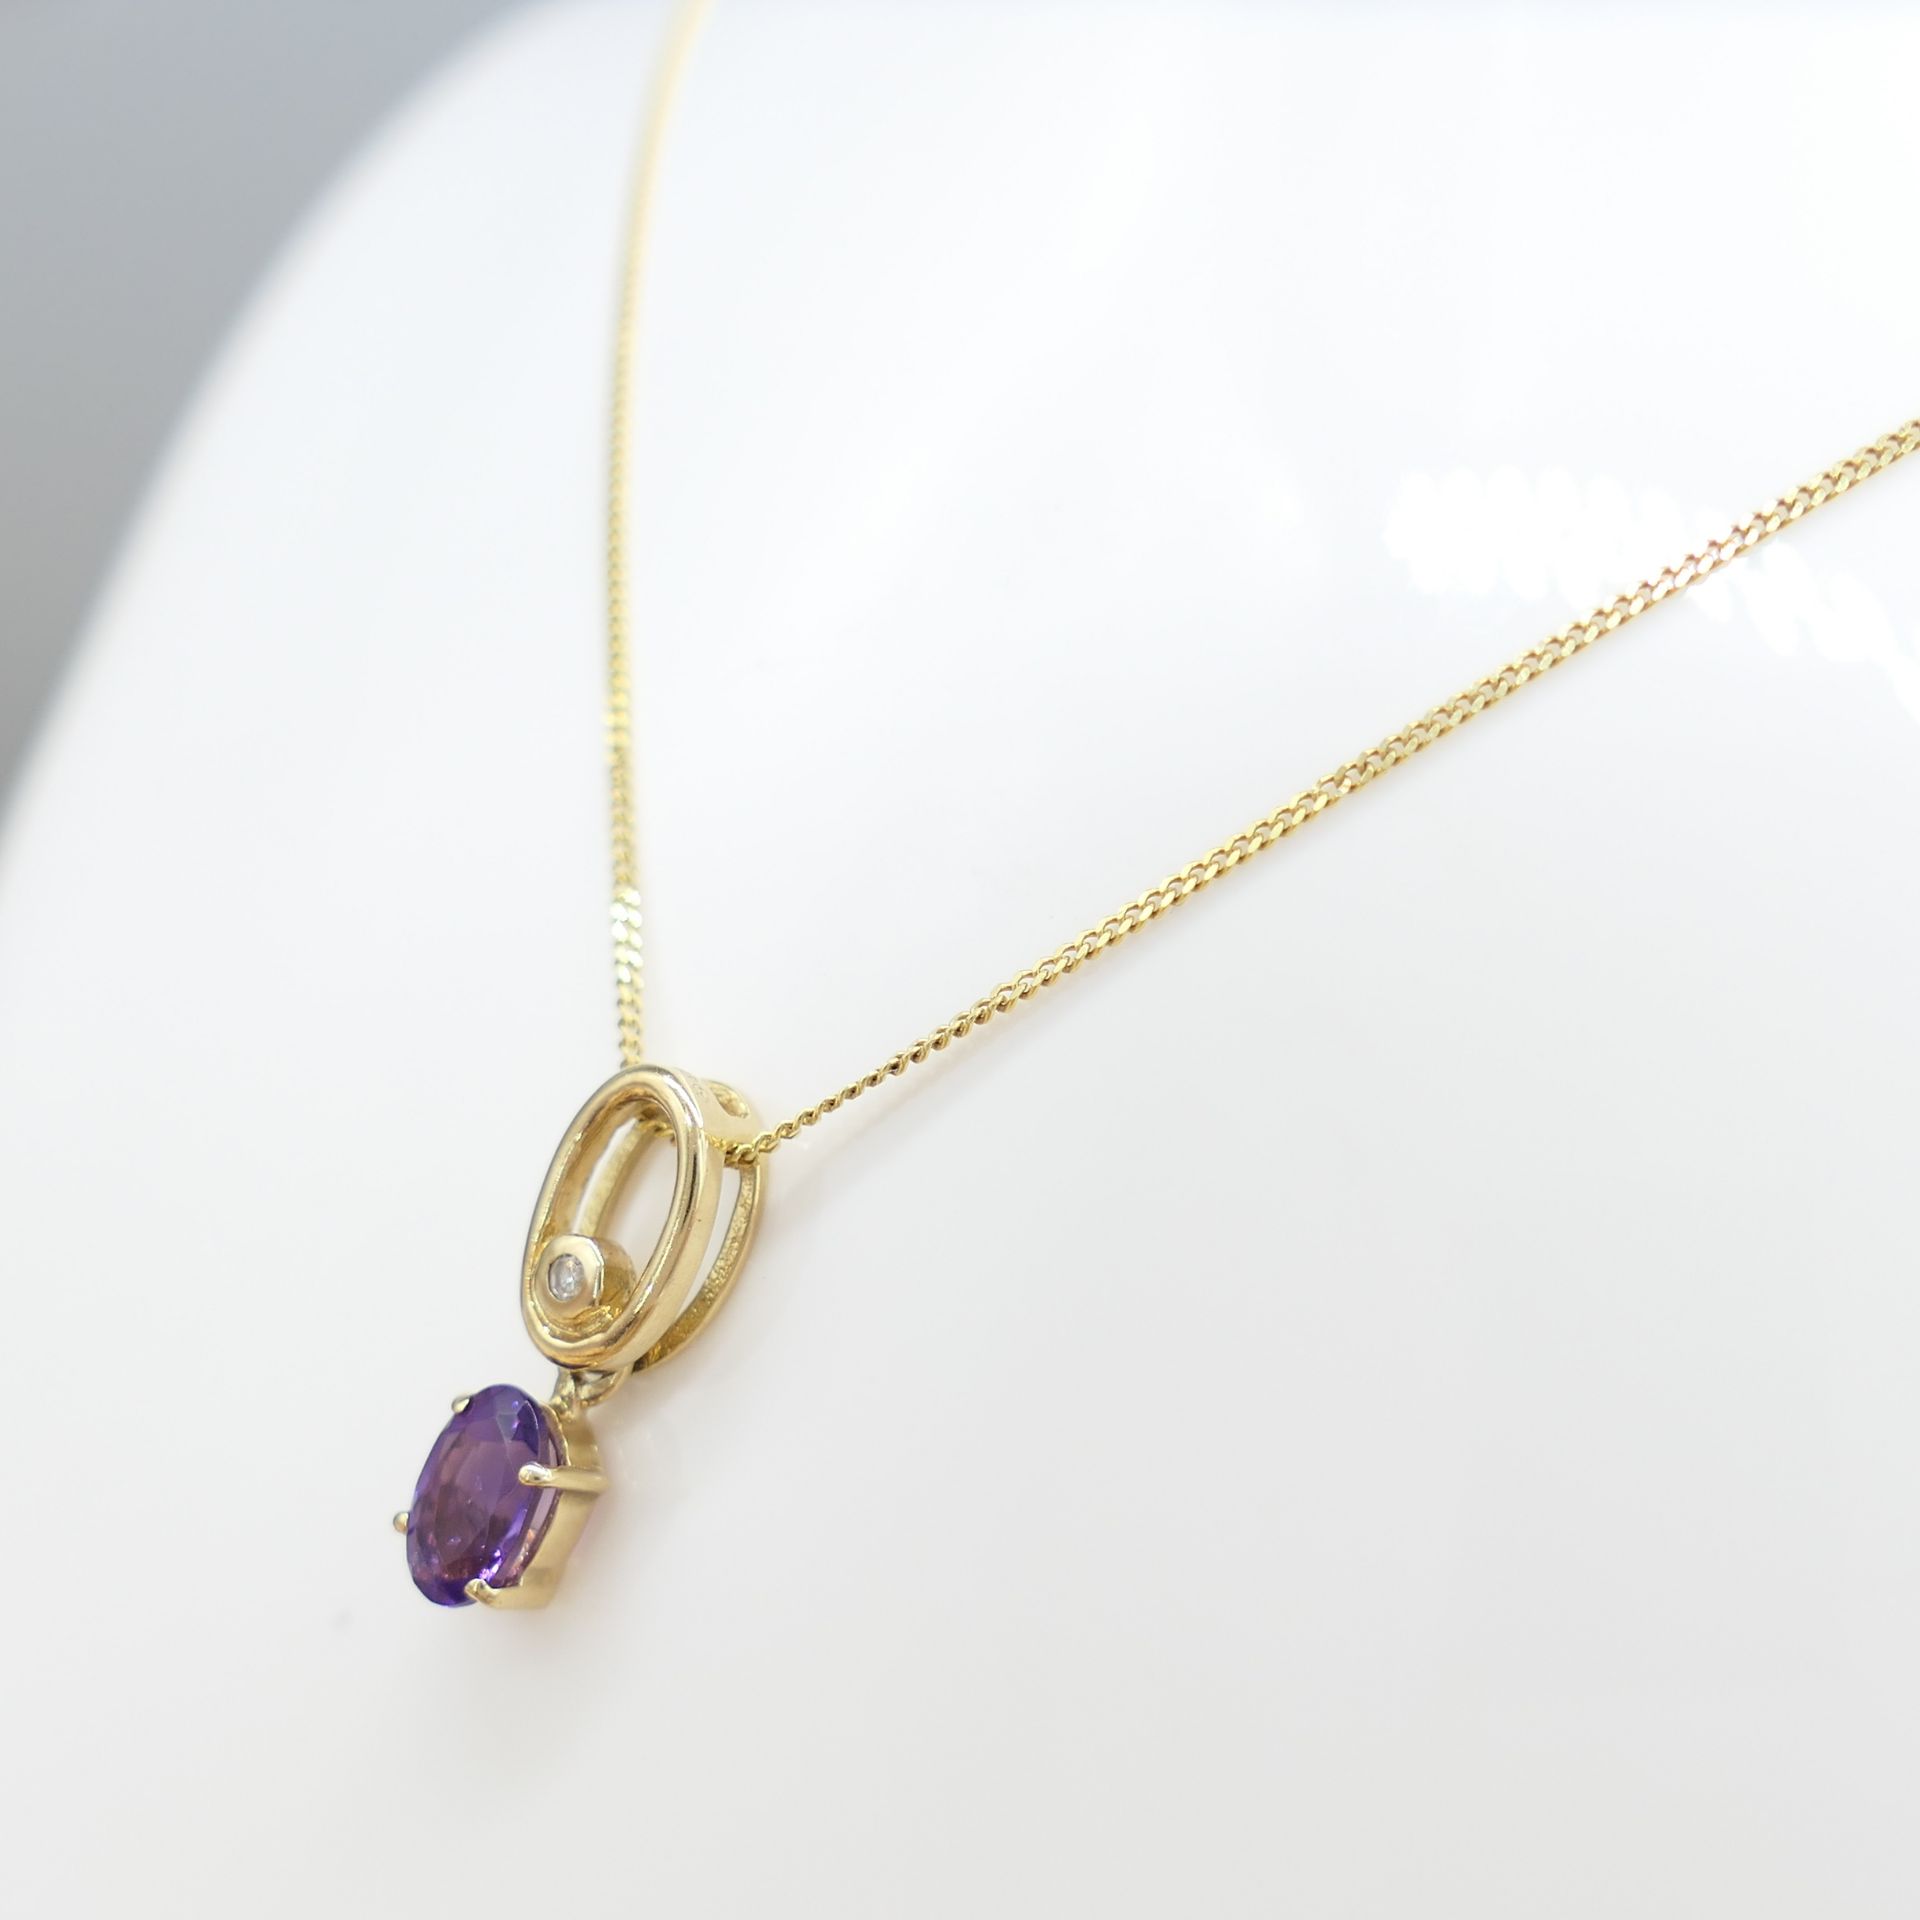 Attractive Yellow Gold Amethyst and Diamond Necklace, Supplied With A Gift Box - Image 3 of 6